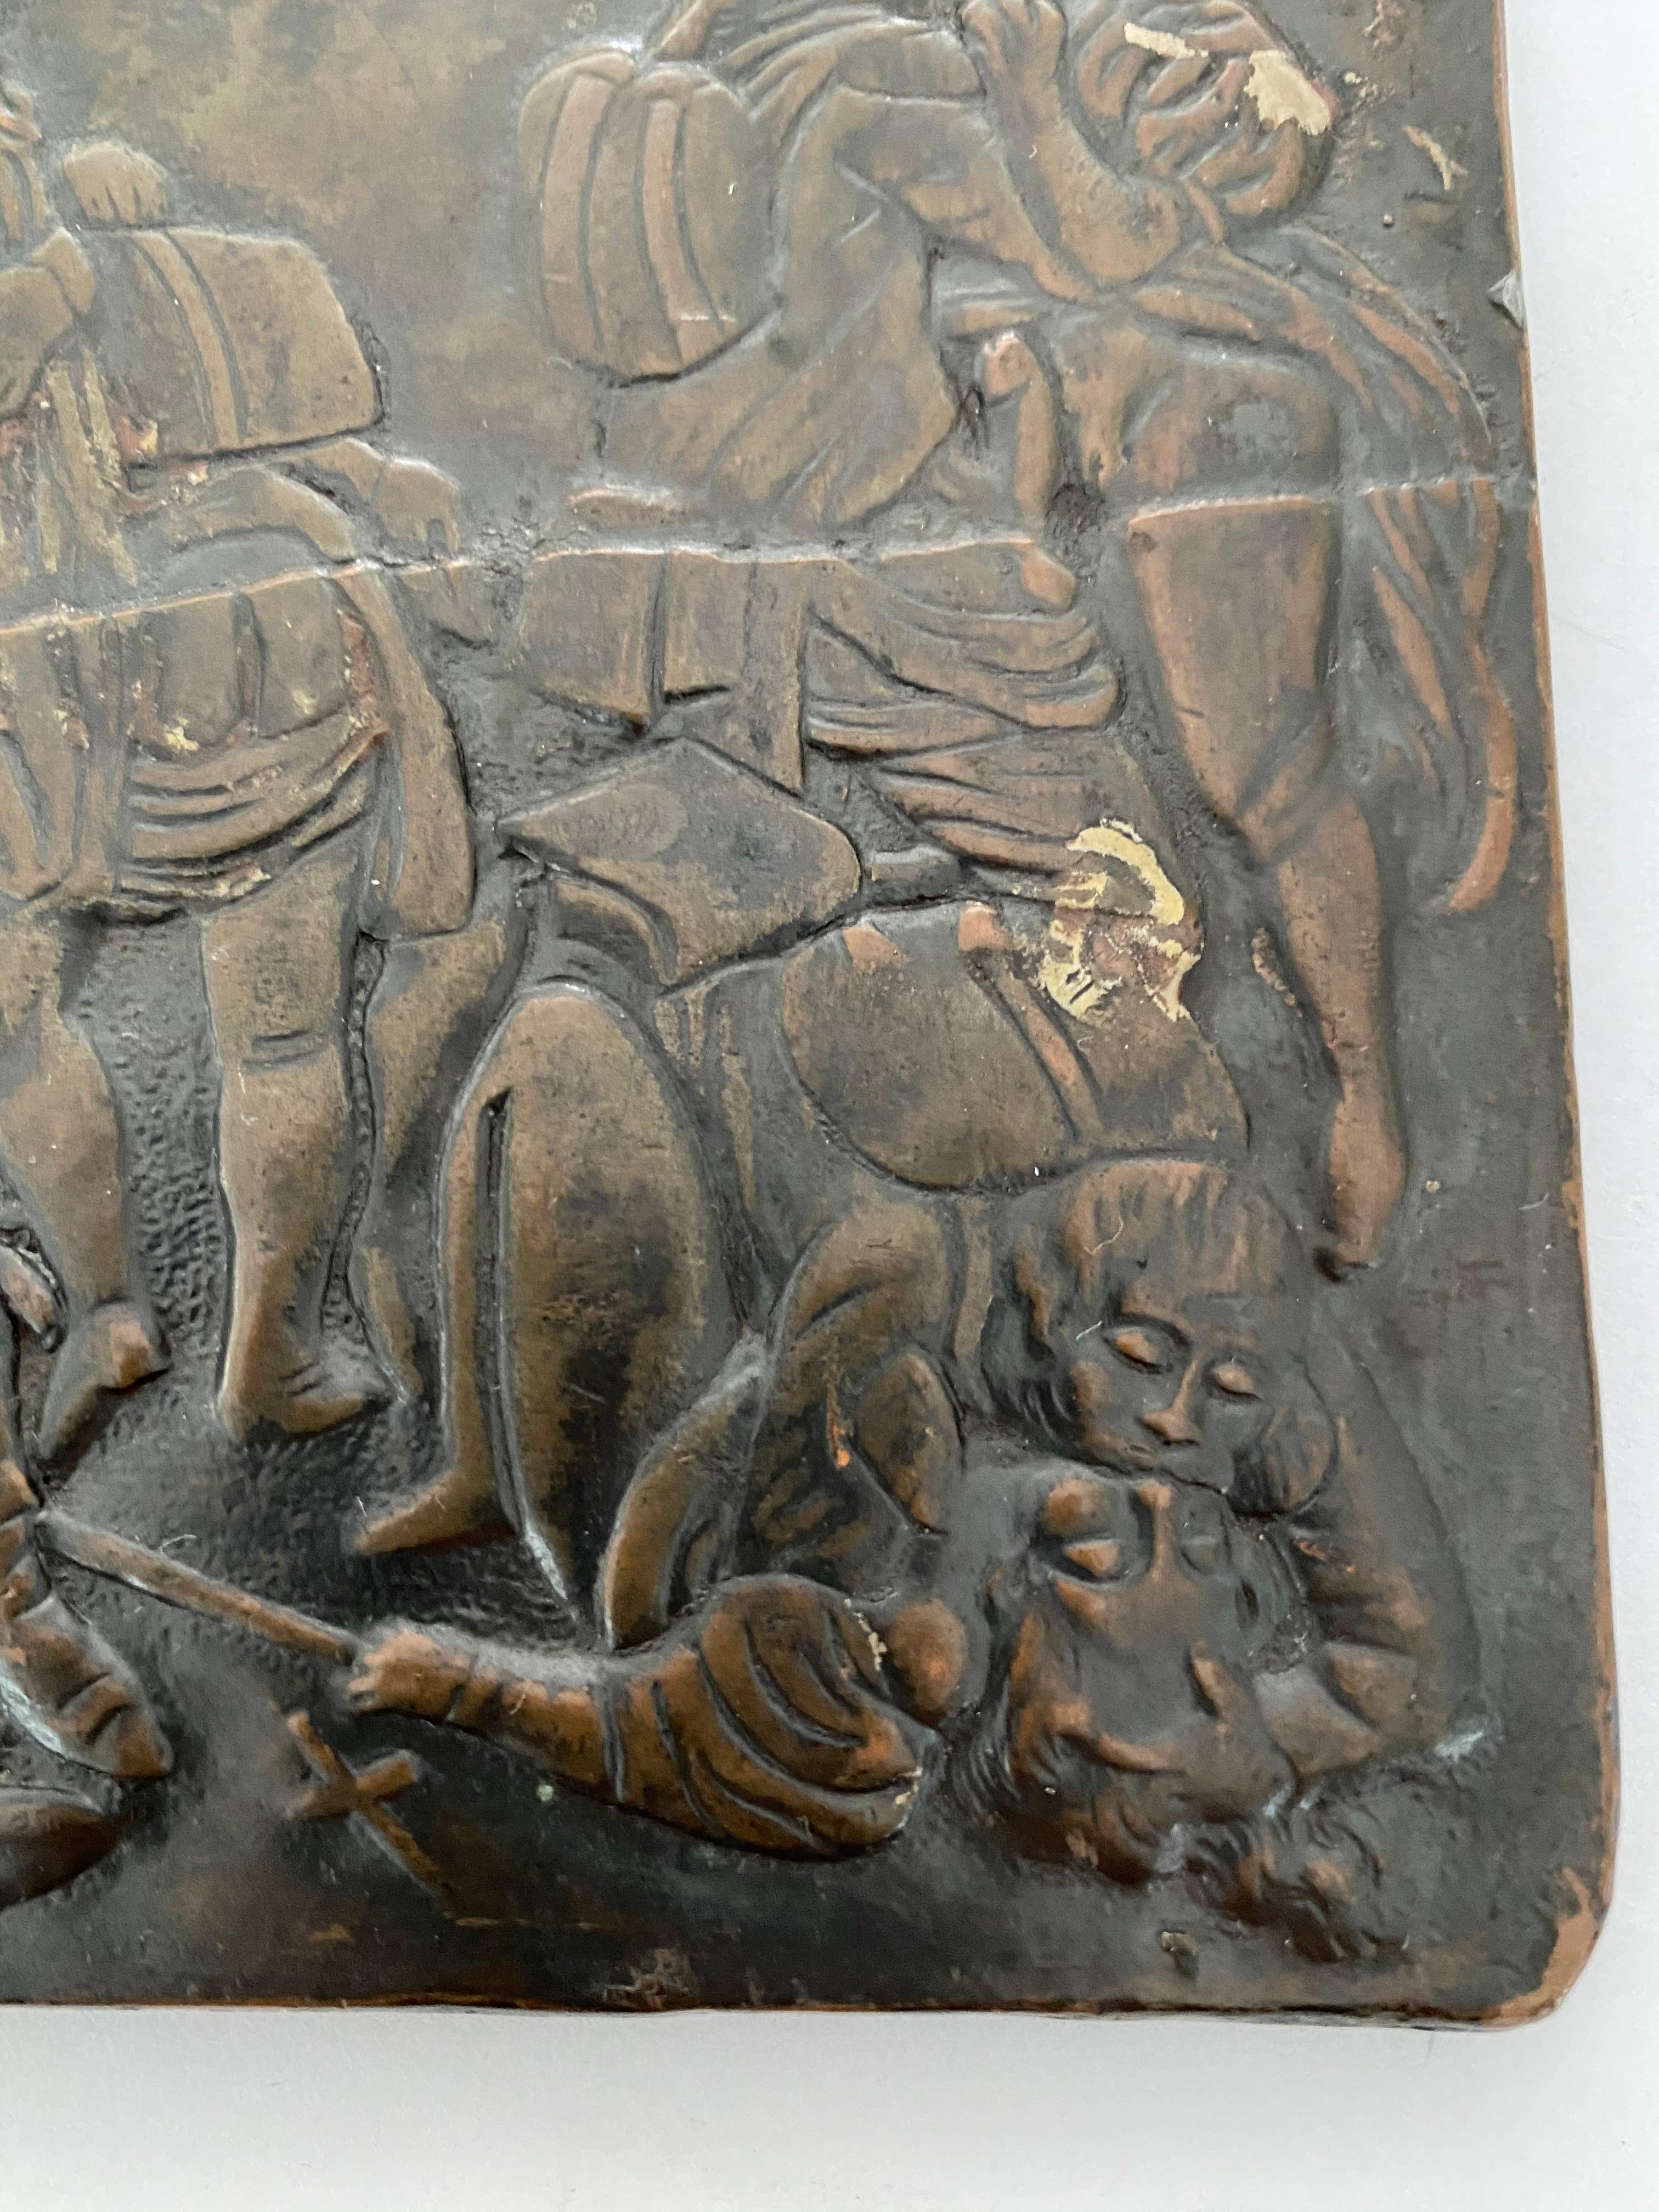 This rare and damaged copper repoussé relief 18 people in erotic play involving French soldiers of various rank and state of undress. The artwork has a horizontal crack across the center of the scene. The relief is backed by a sold bronze panel.